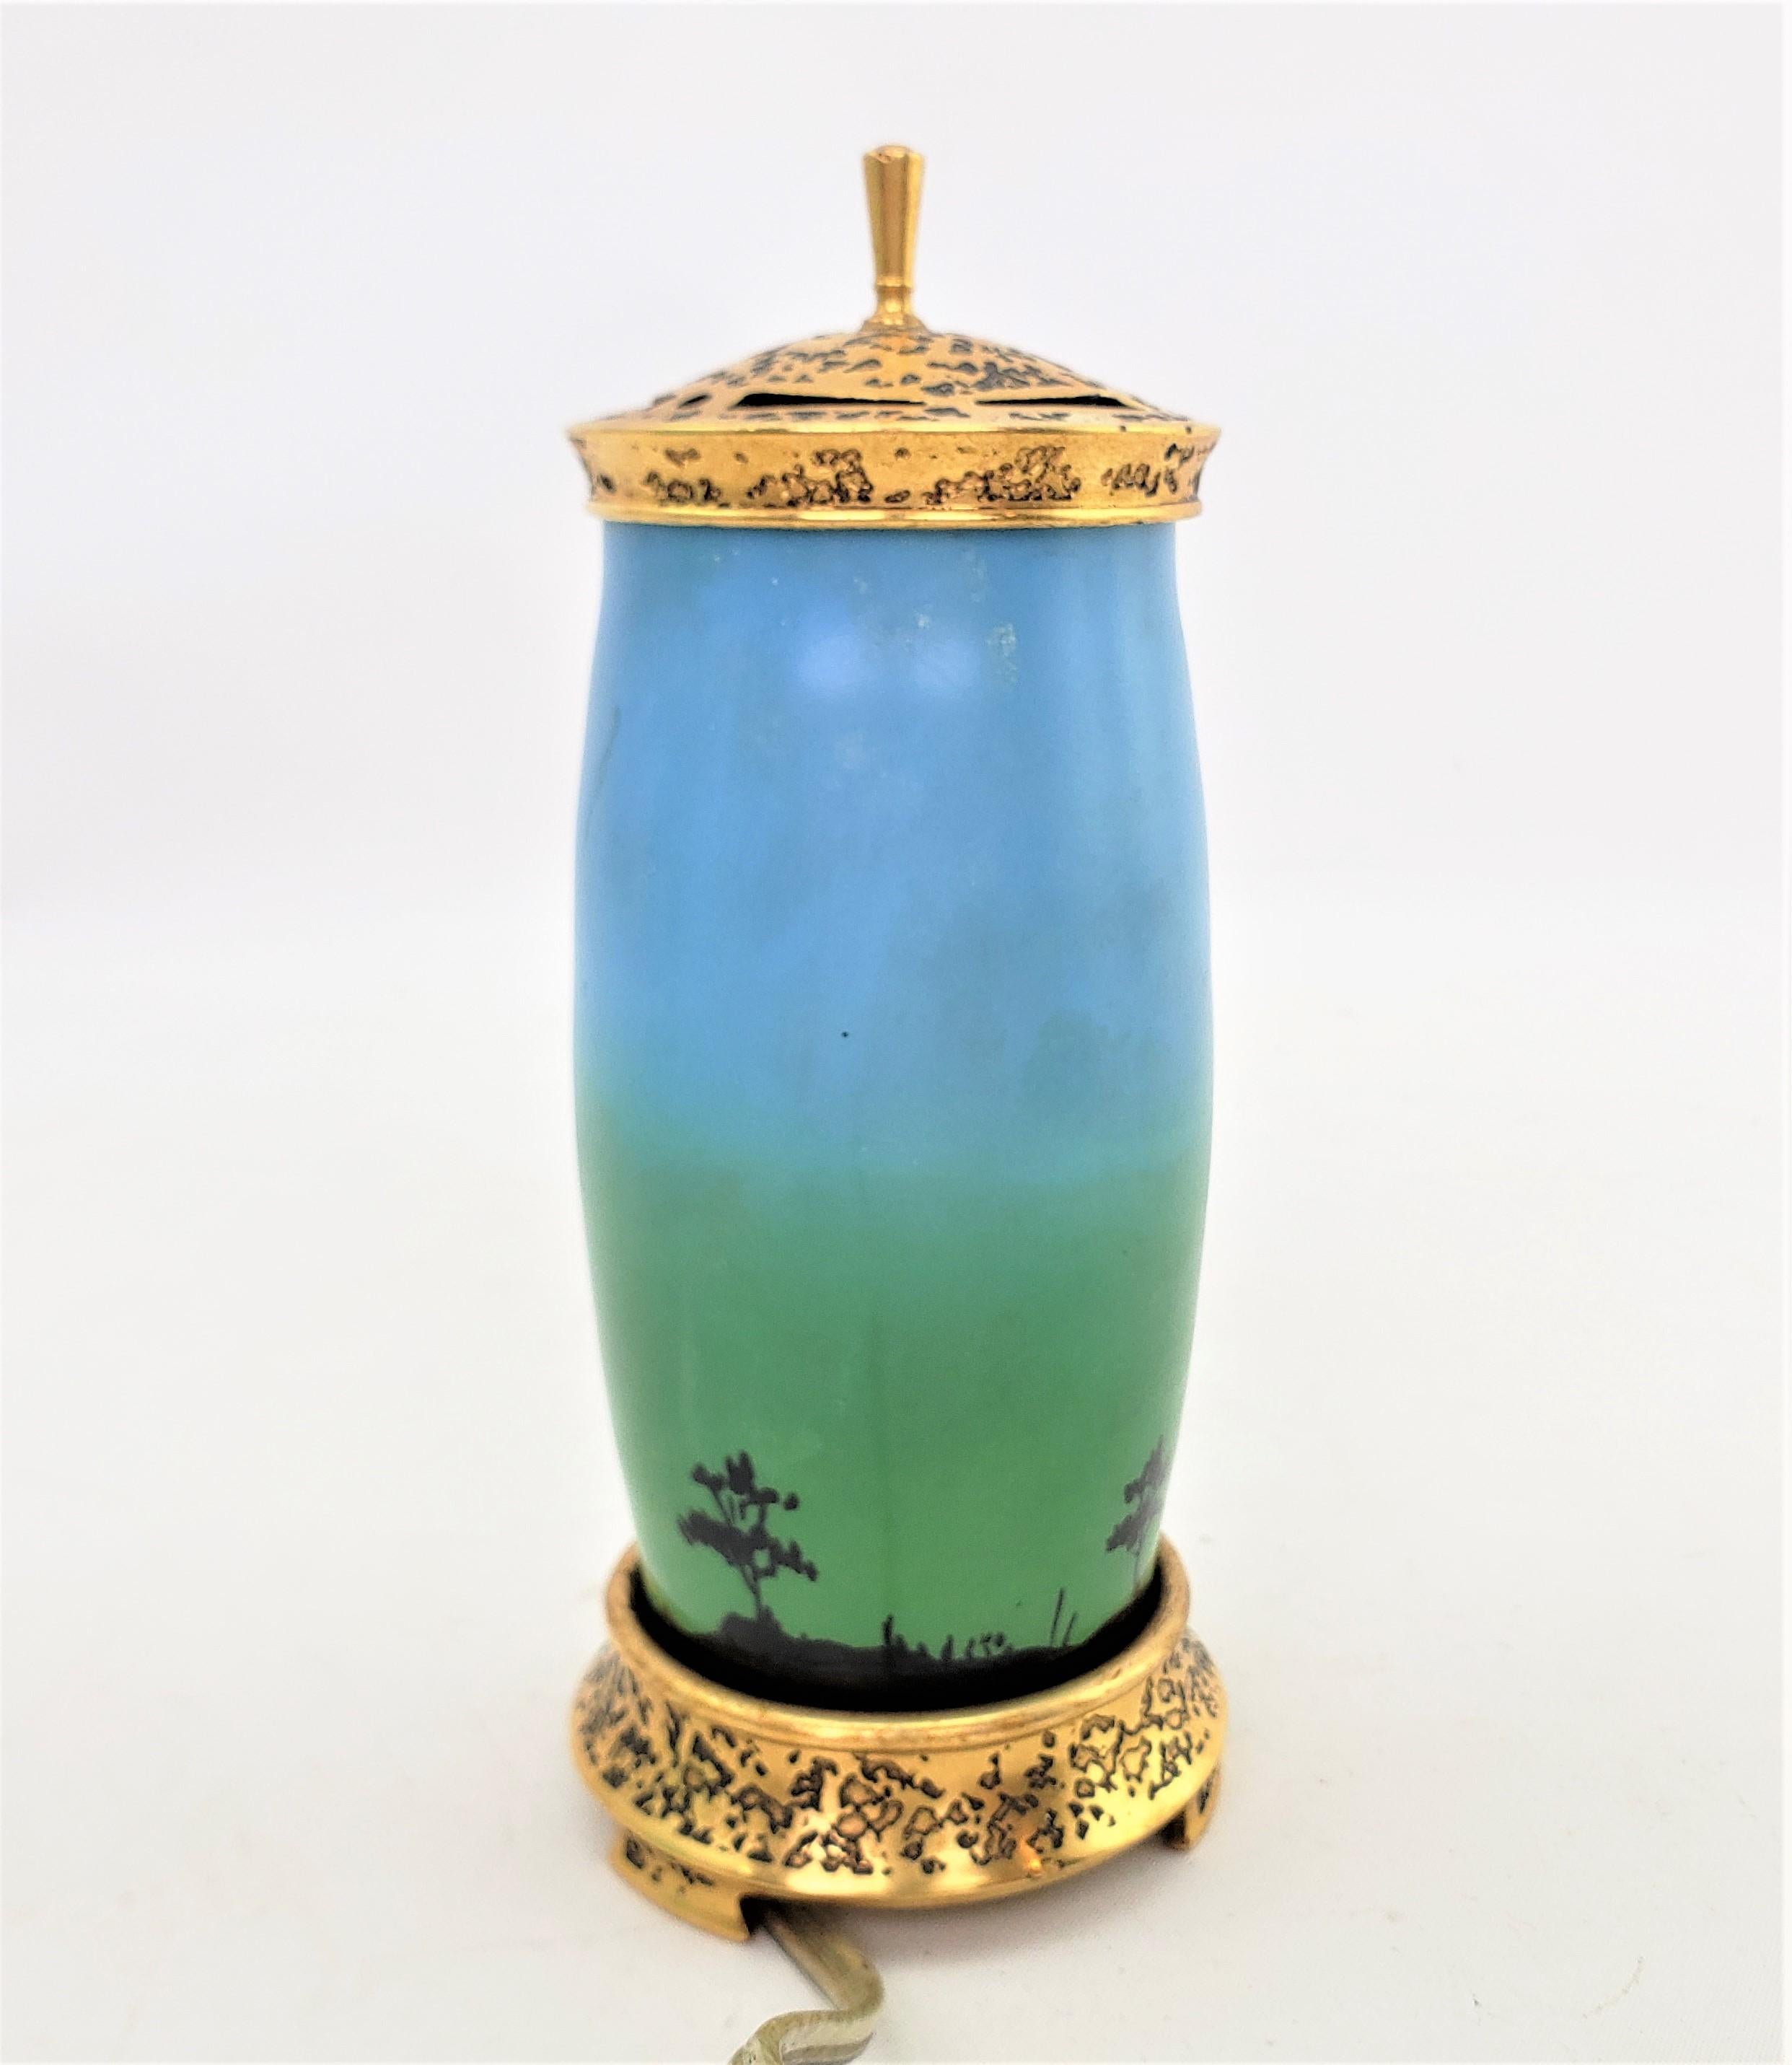 20th Century Antique DeVilbiss Bronze & Enameled Art Glass Perfume Lamp with Dancing Pixies